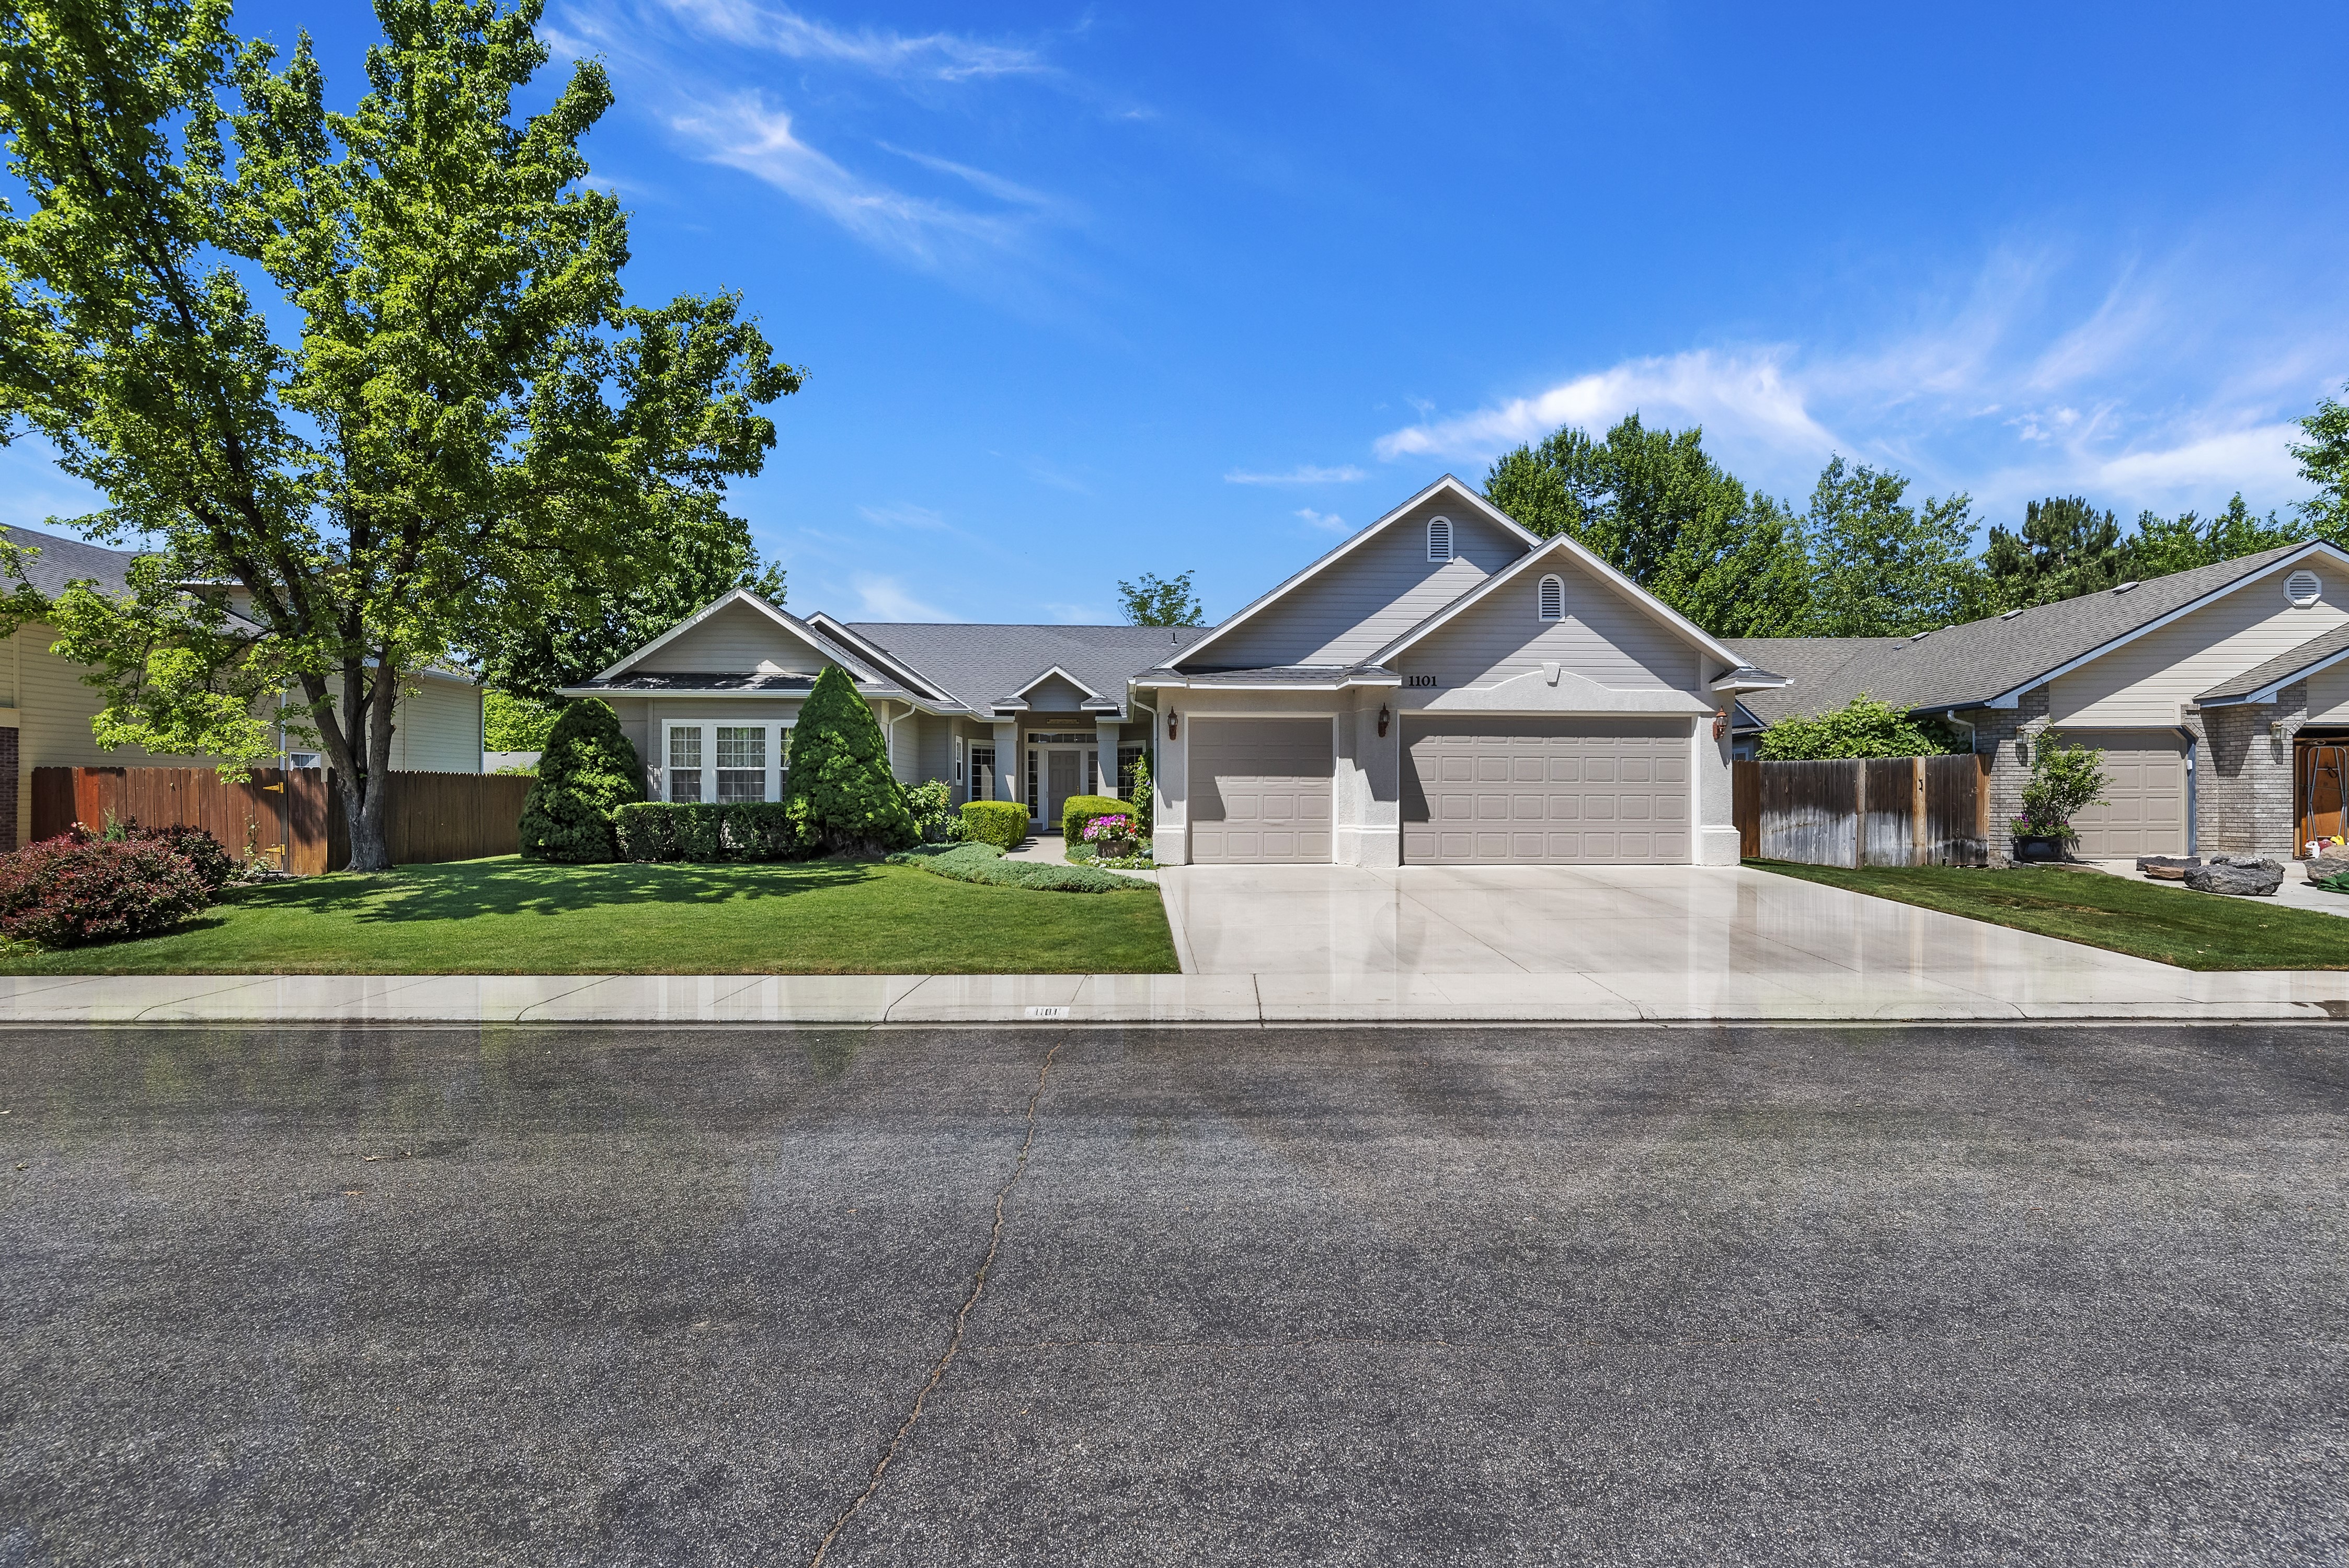 Great Eagle Idaho Home for Sale in Desirable Community! Now Sold